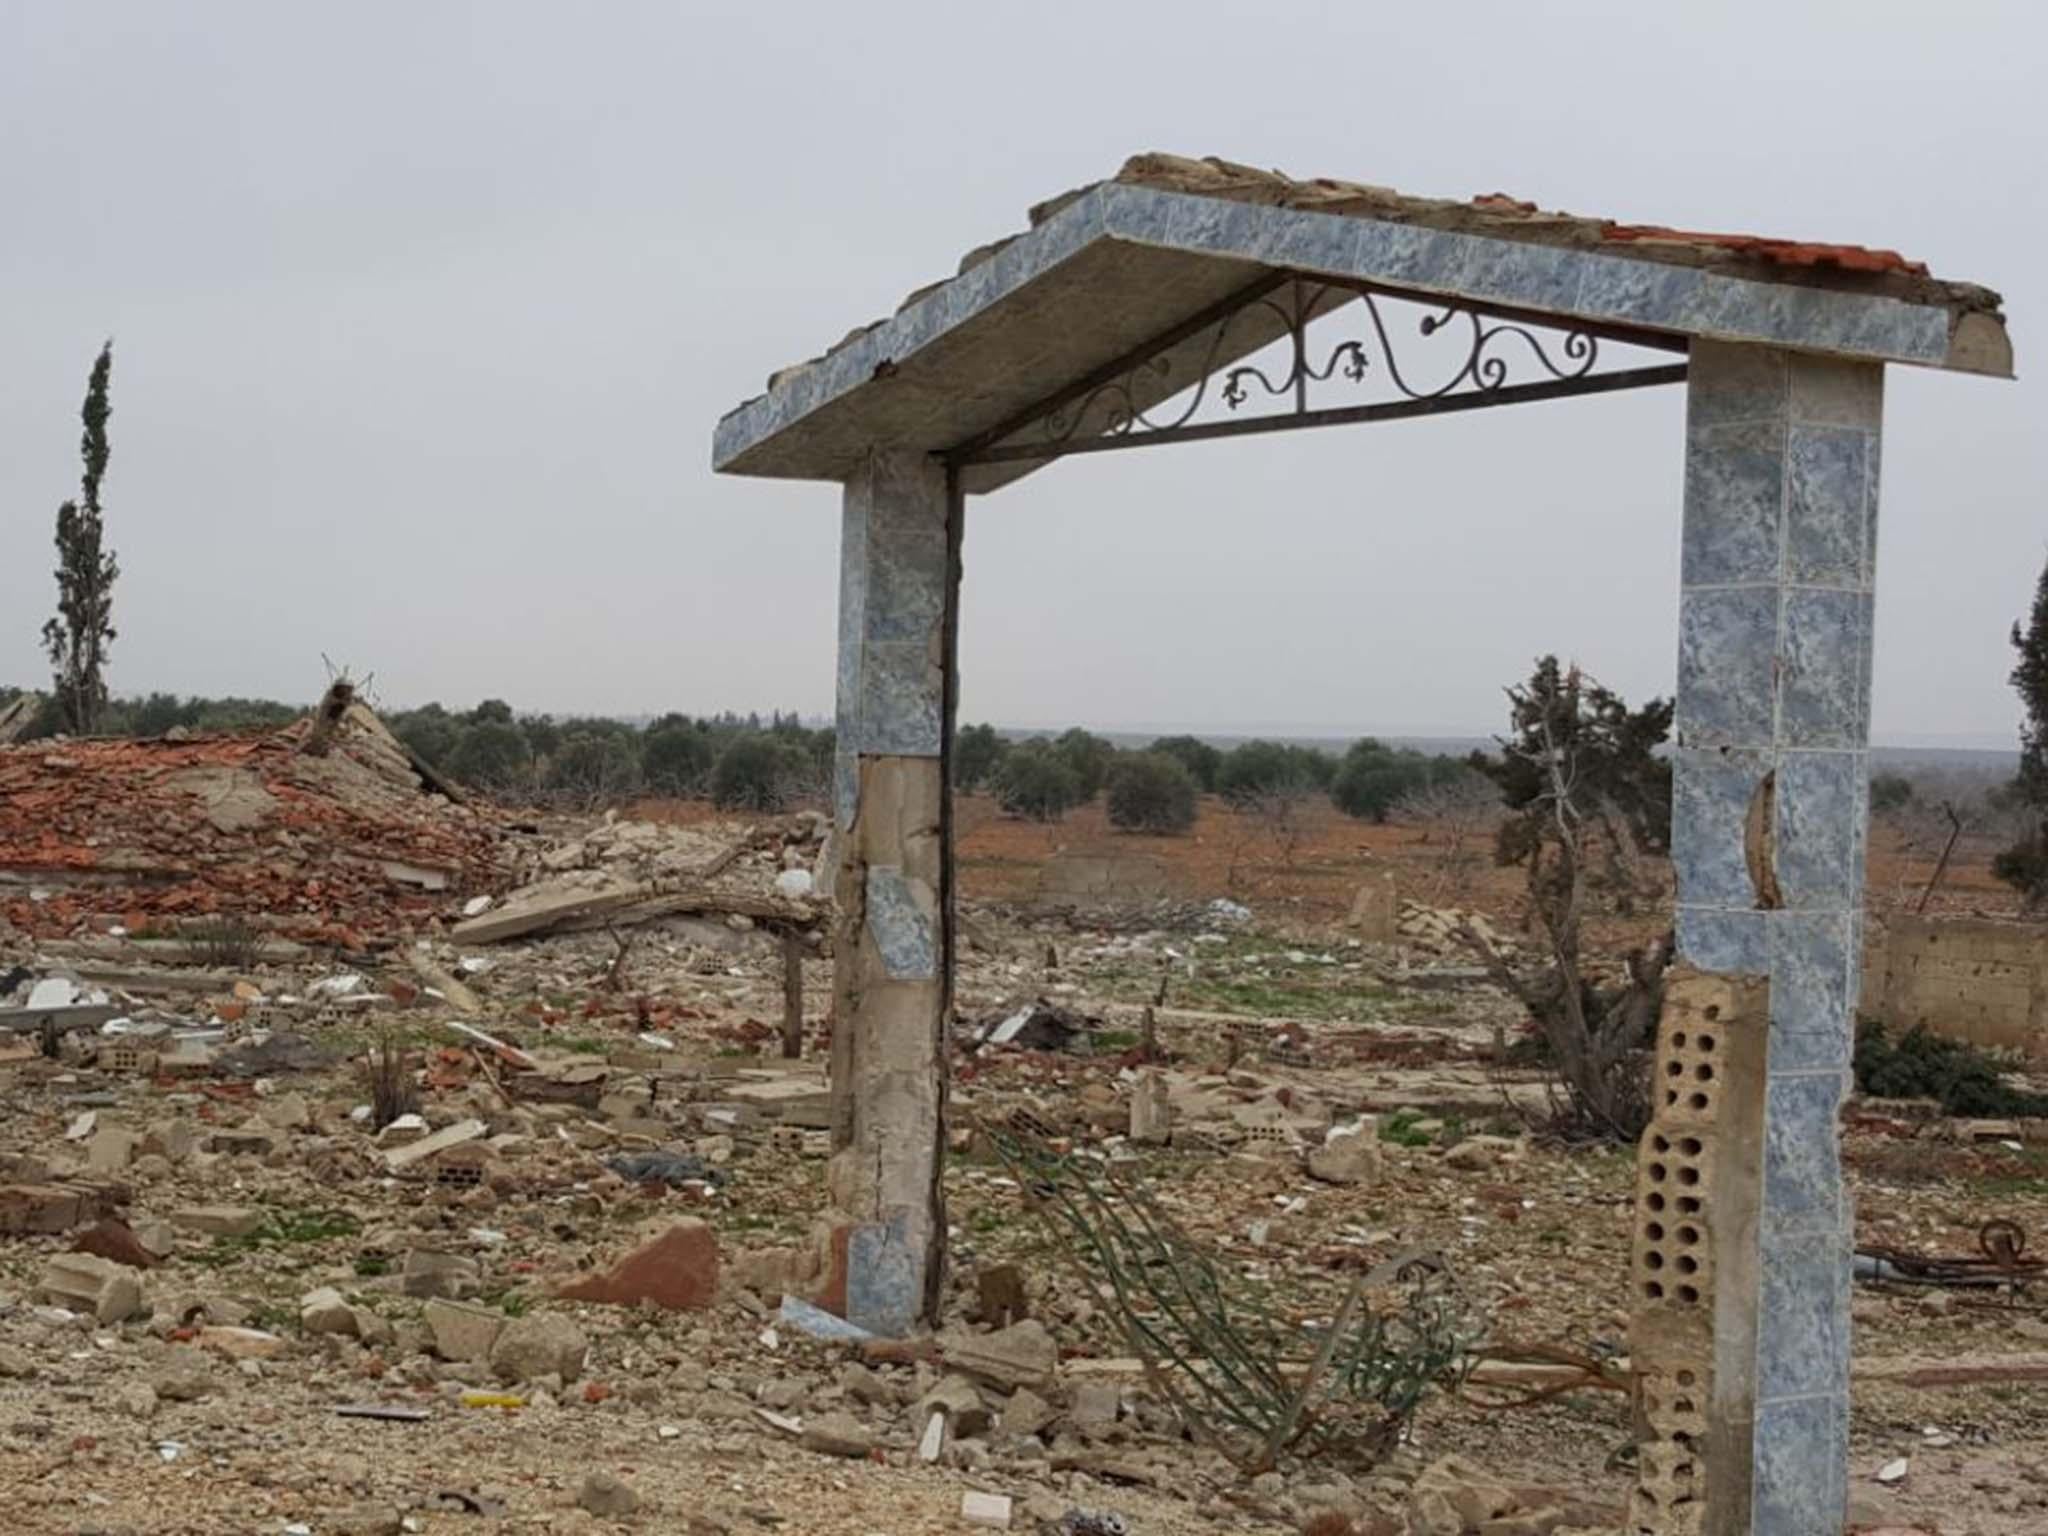 Only the gate is left. In towns and villages around Sinjar, houses and villas were destroyed during the Syrian advance north